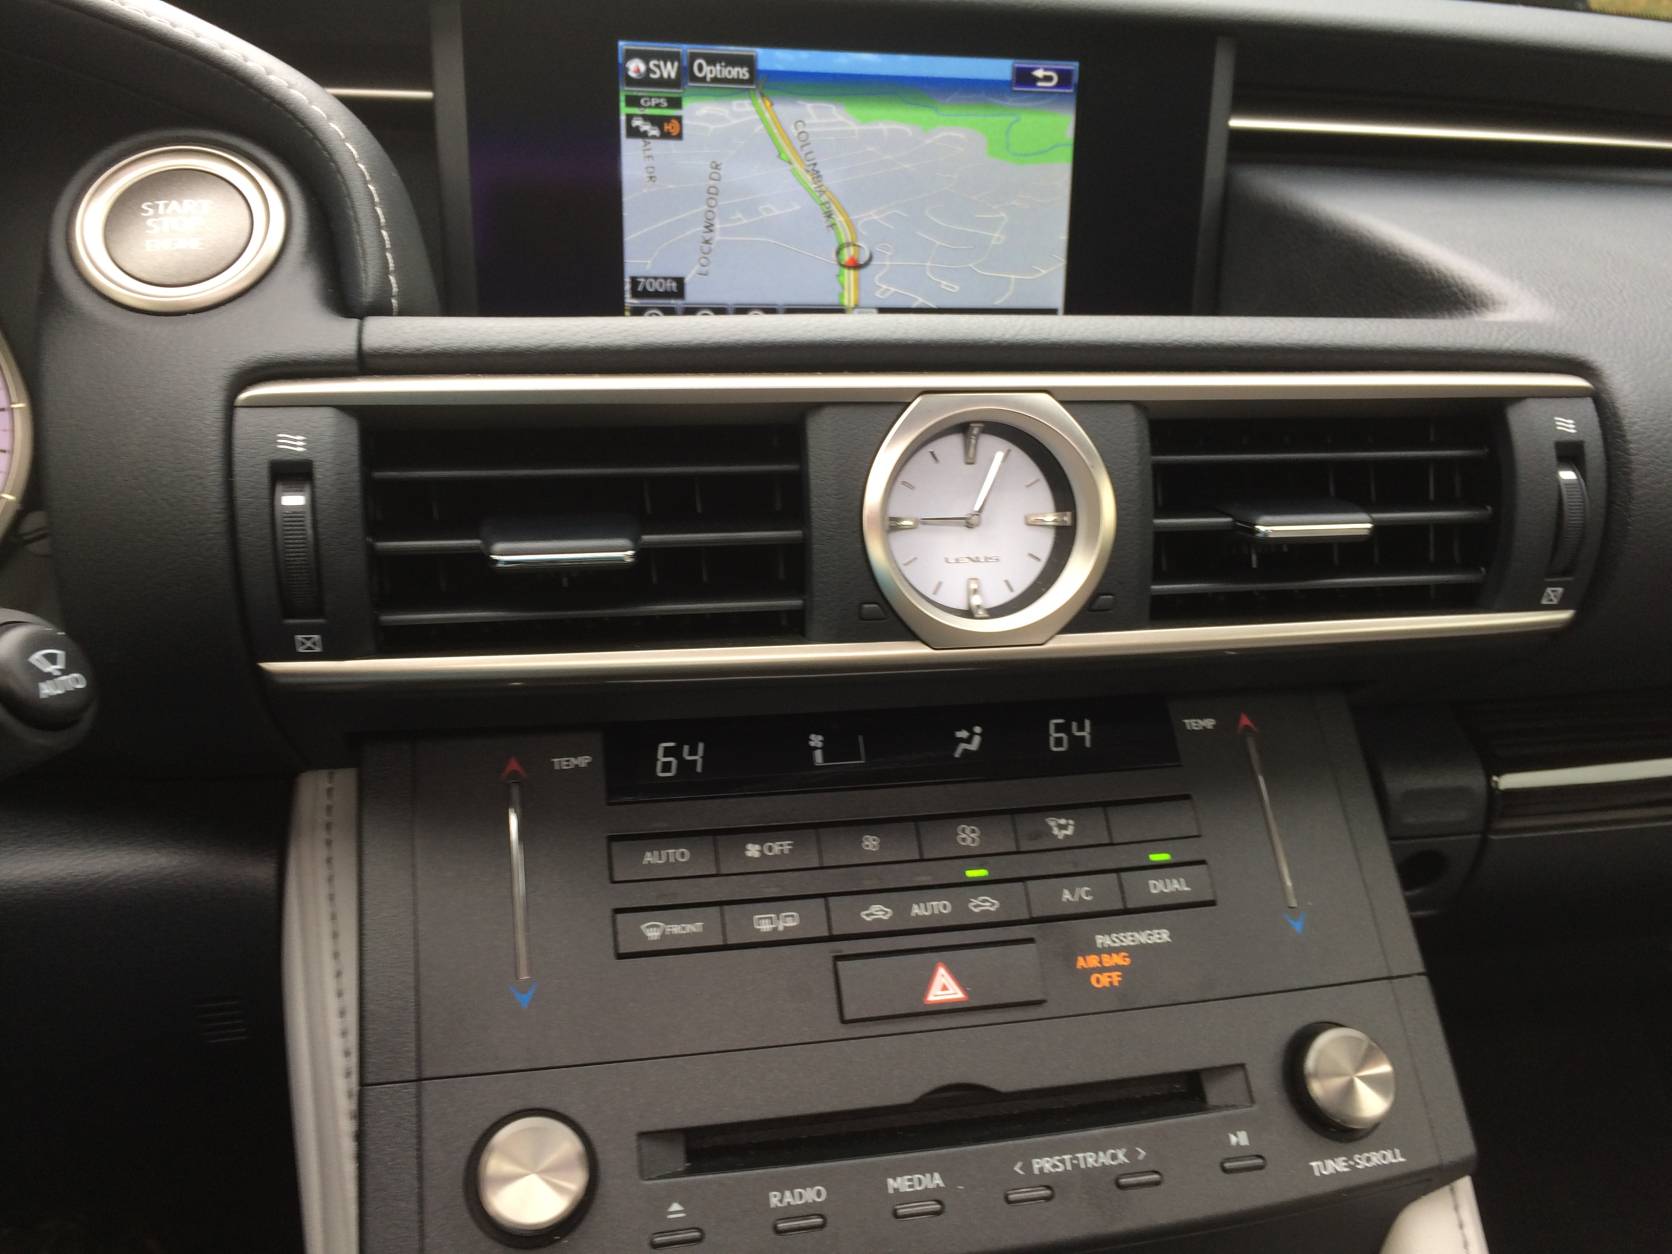 The NAV system is also a $1,530 option that adds a back-up camera and voice command. The radio has knobs for volume and tuning.
(WTOP/Mike Parris)